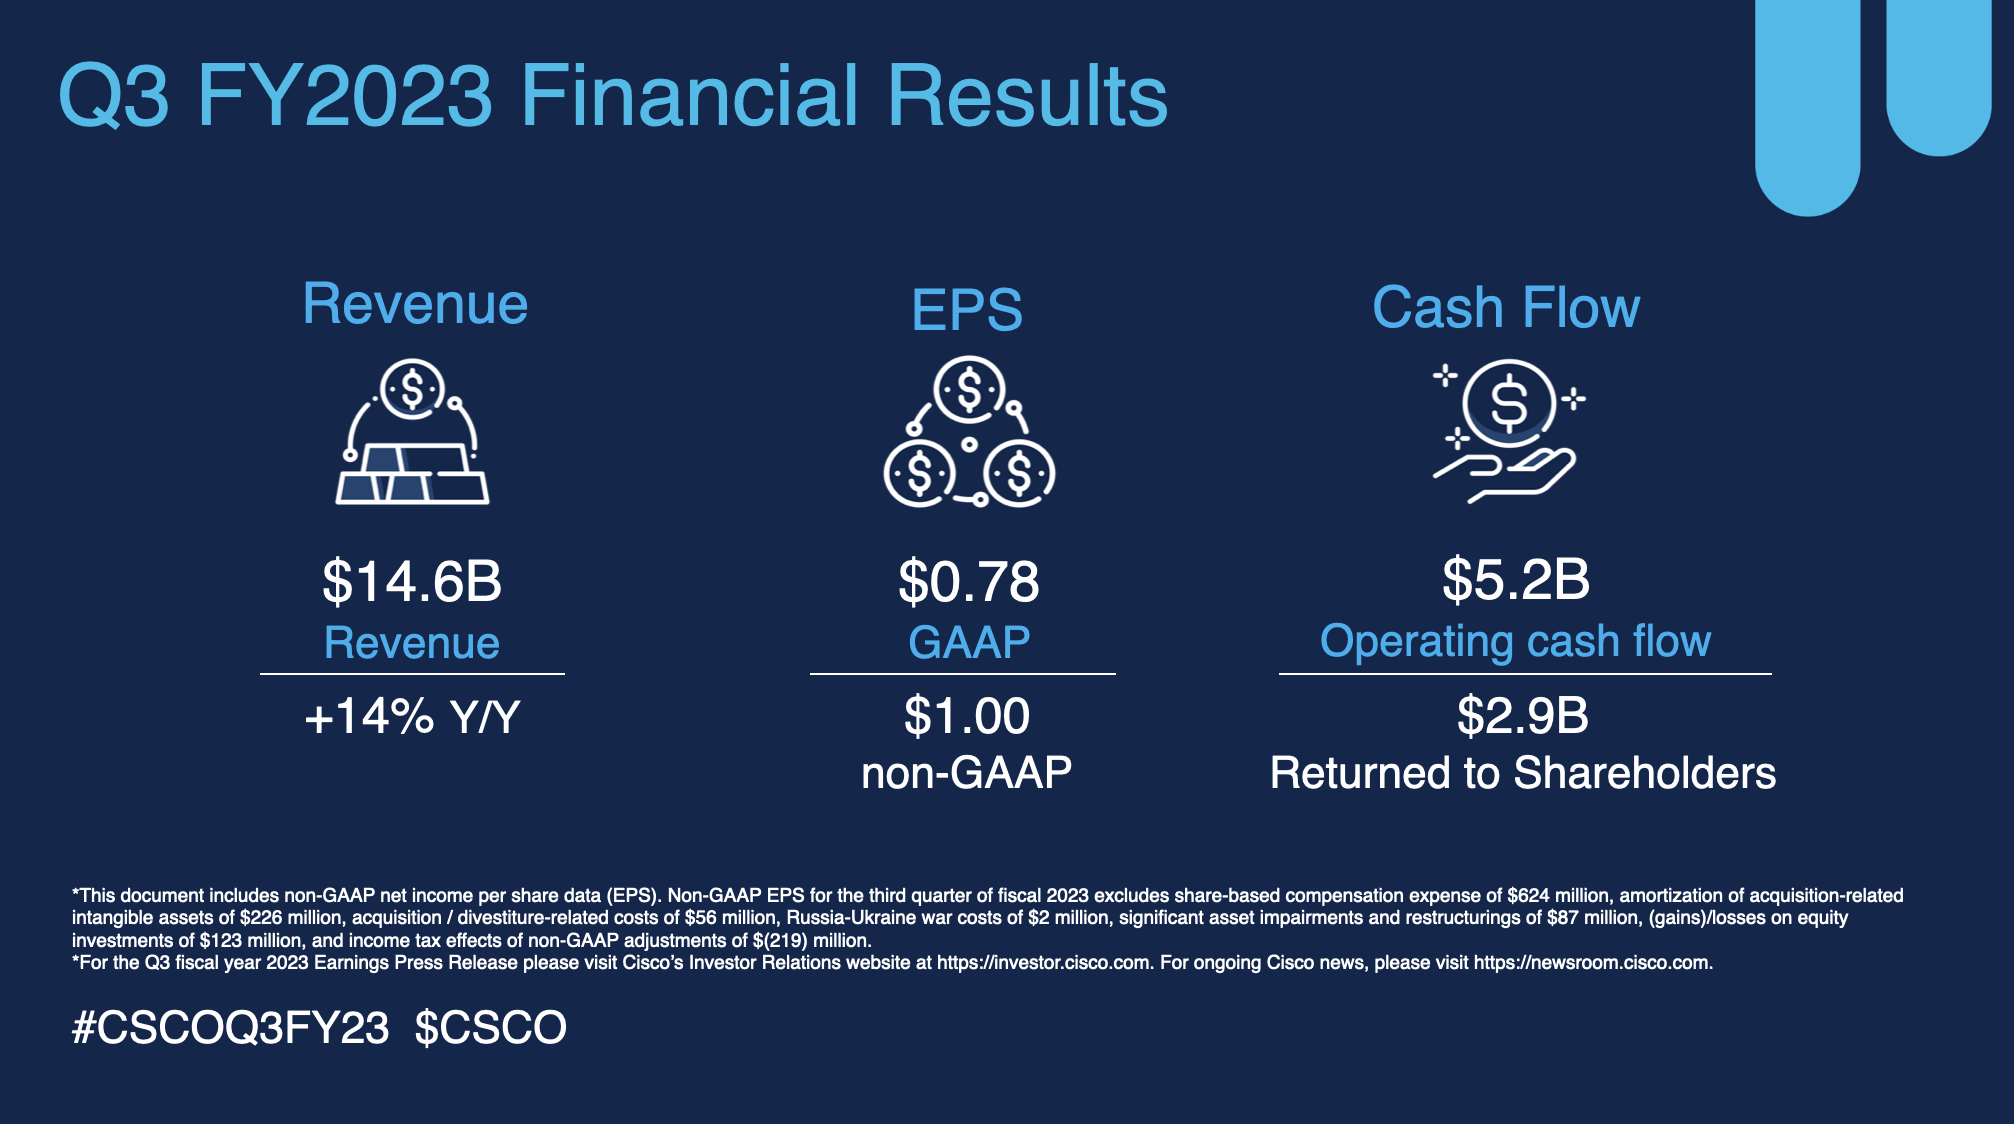 Cisco Q3 FY2023 Financial Results Infographic